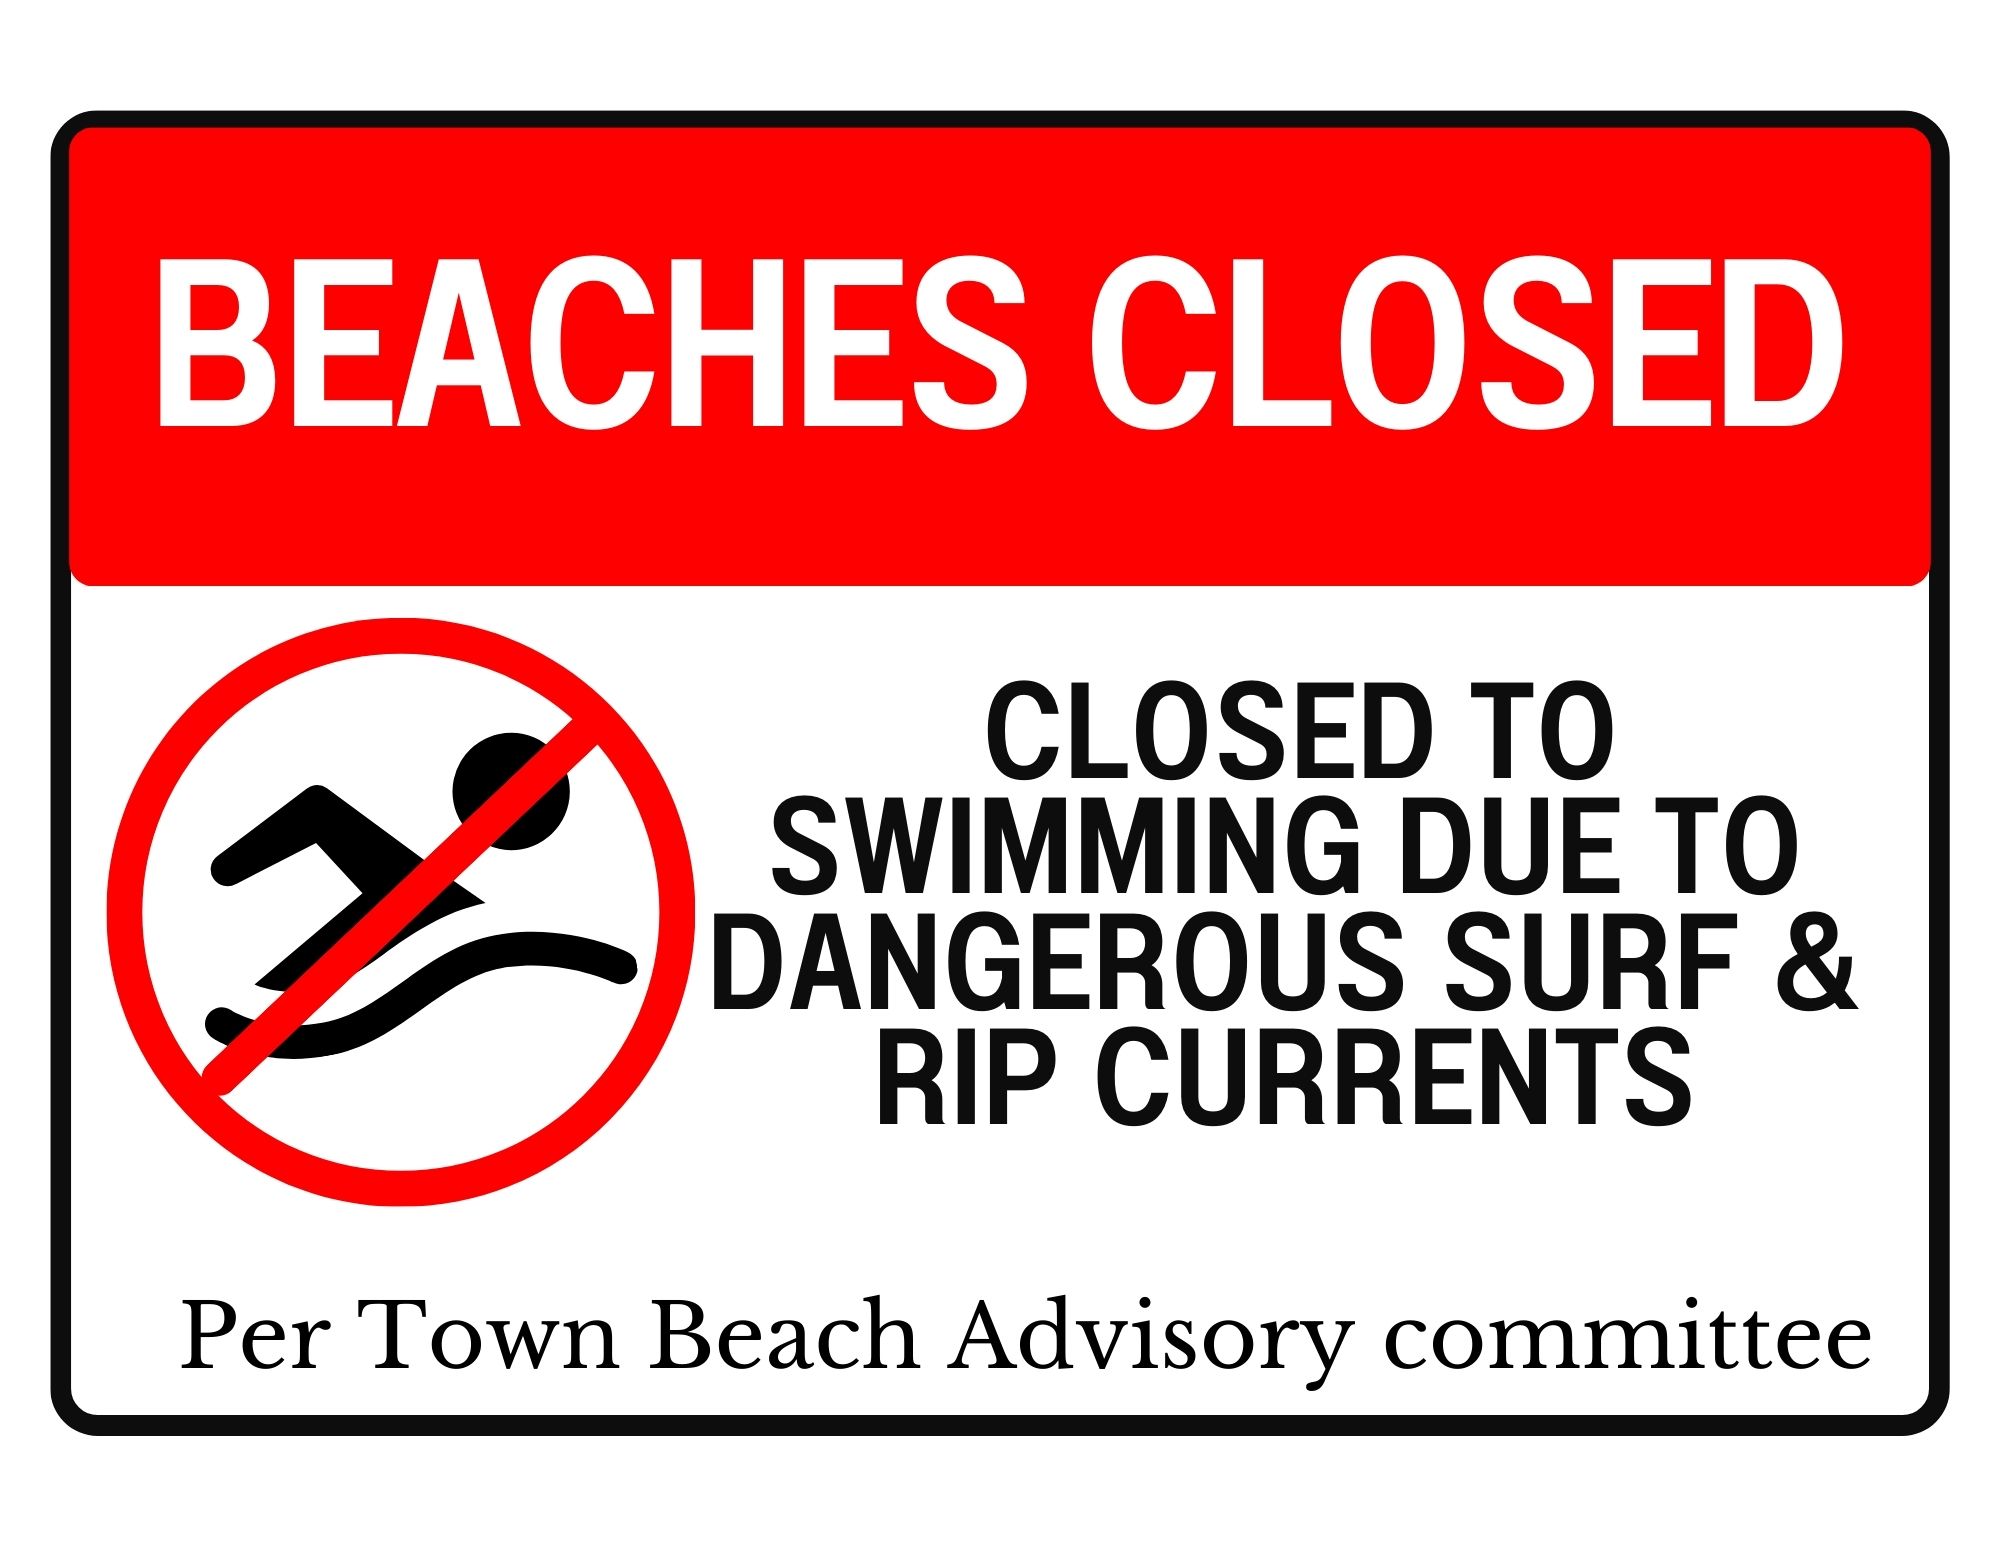 Warning sign advising of the East Hampton Town Ocean Beaches Closures to swimming due to dangerous surf conditions.